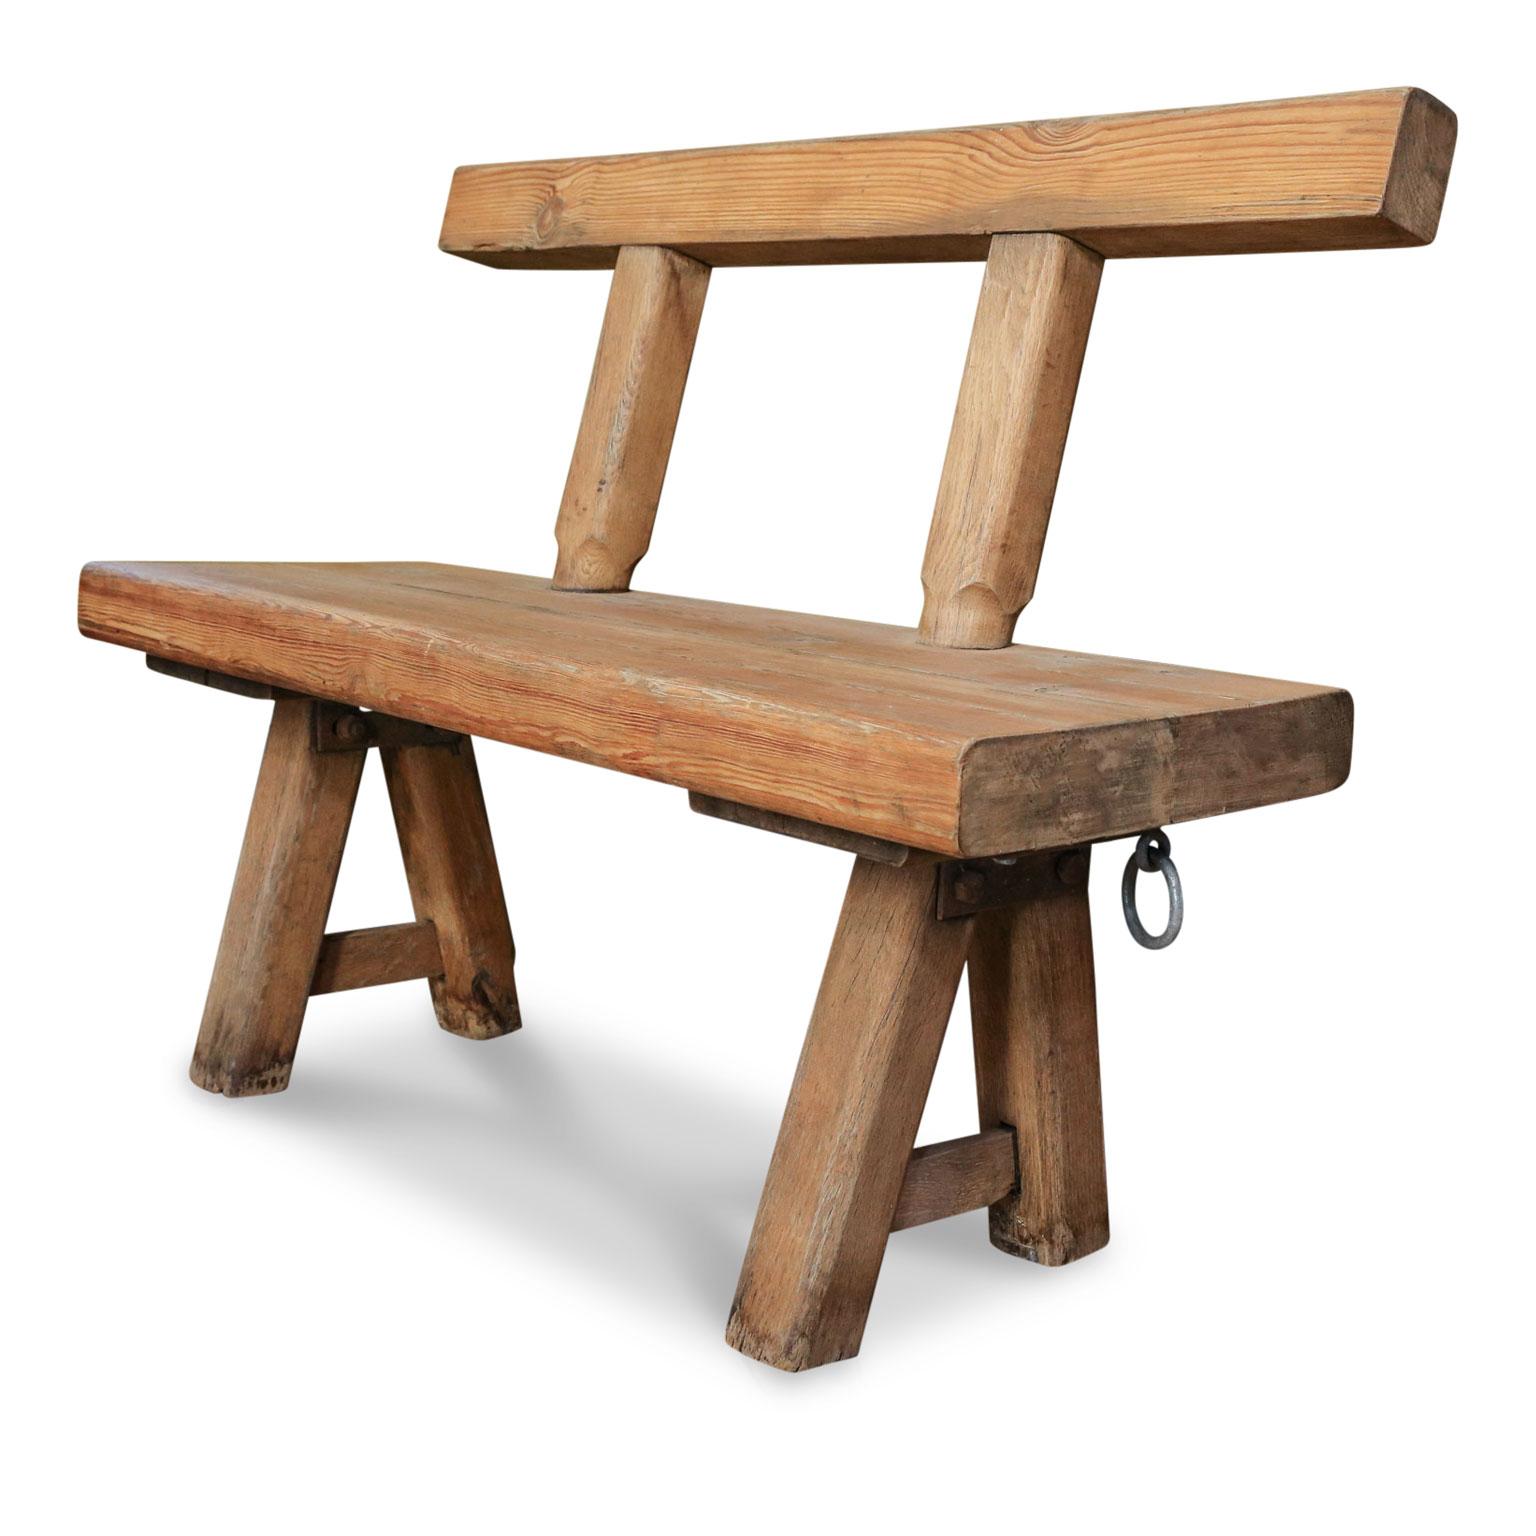 Chunky oak rustic bench (circa 1920-1940), hand-made with massive oak timbers in legged construction and iron brackets. This bench originally comes from a bistro near the Belgian/German border in Alsace-Lorraine.